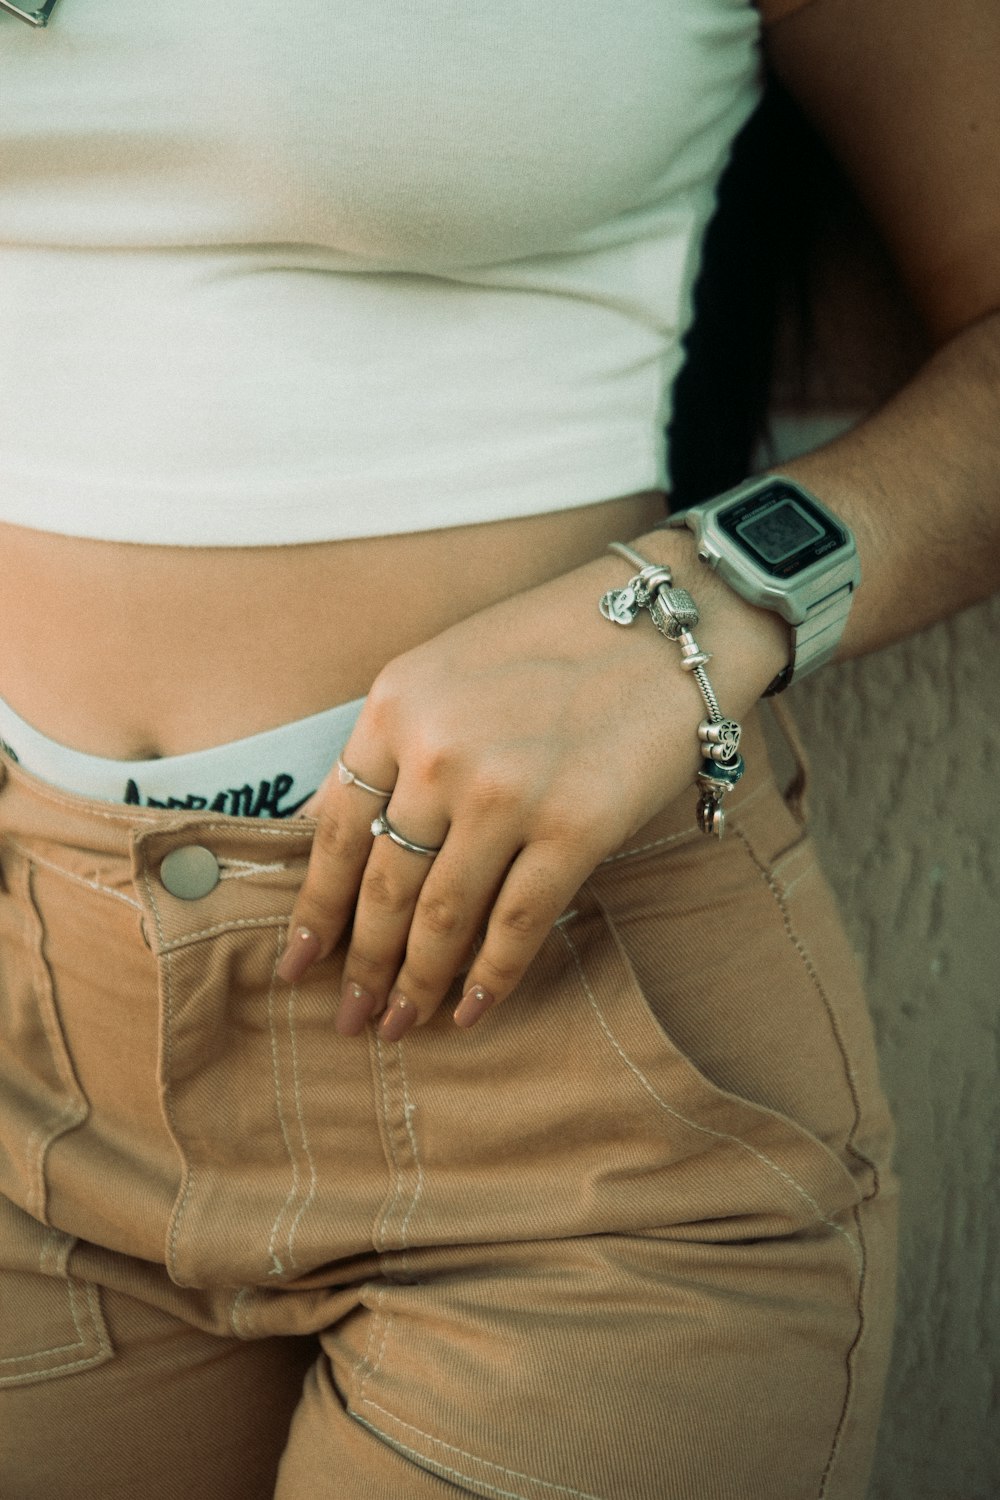 a woman in a white shirt and tan pants with a cell phone in her pocket